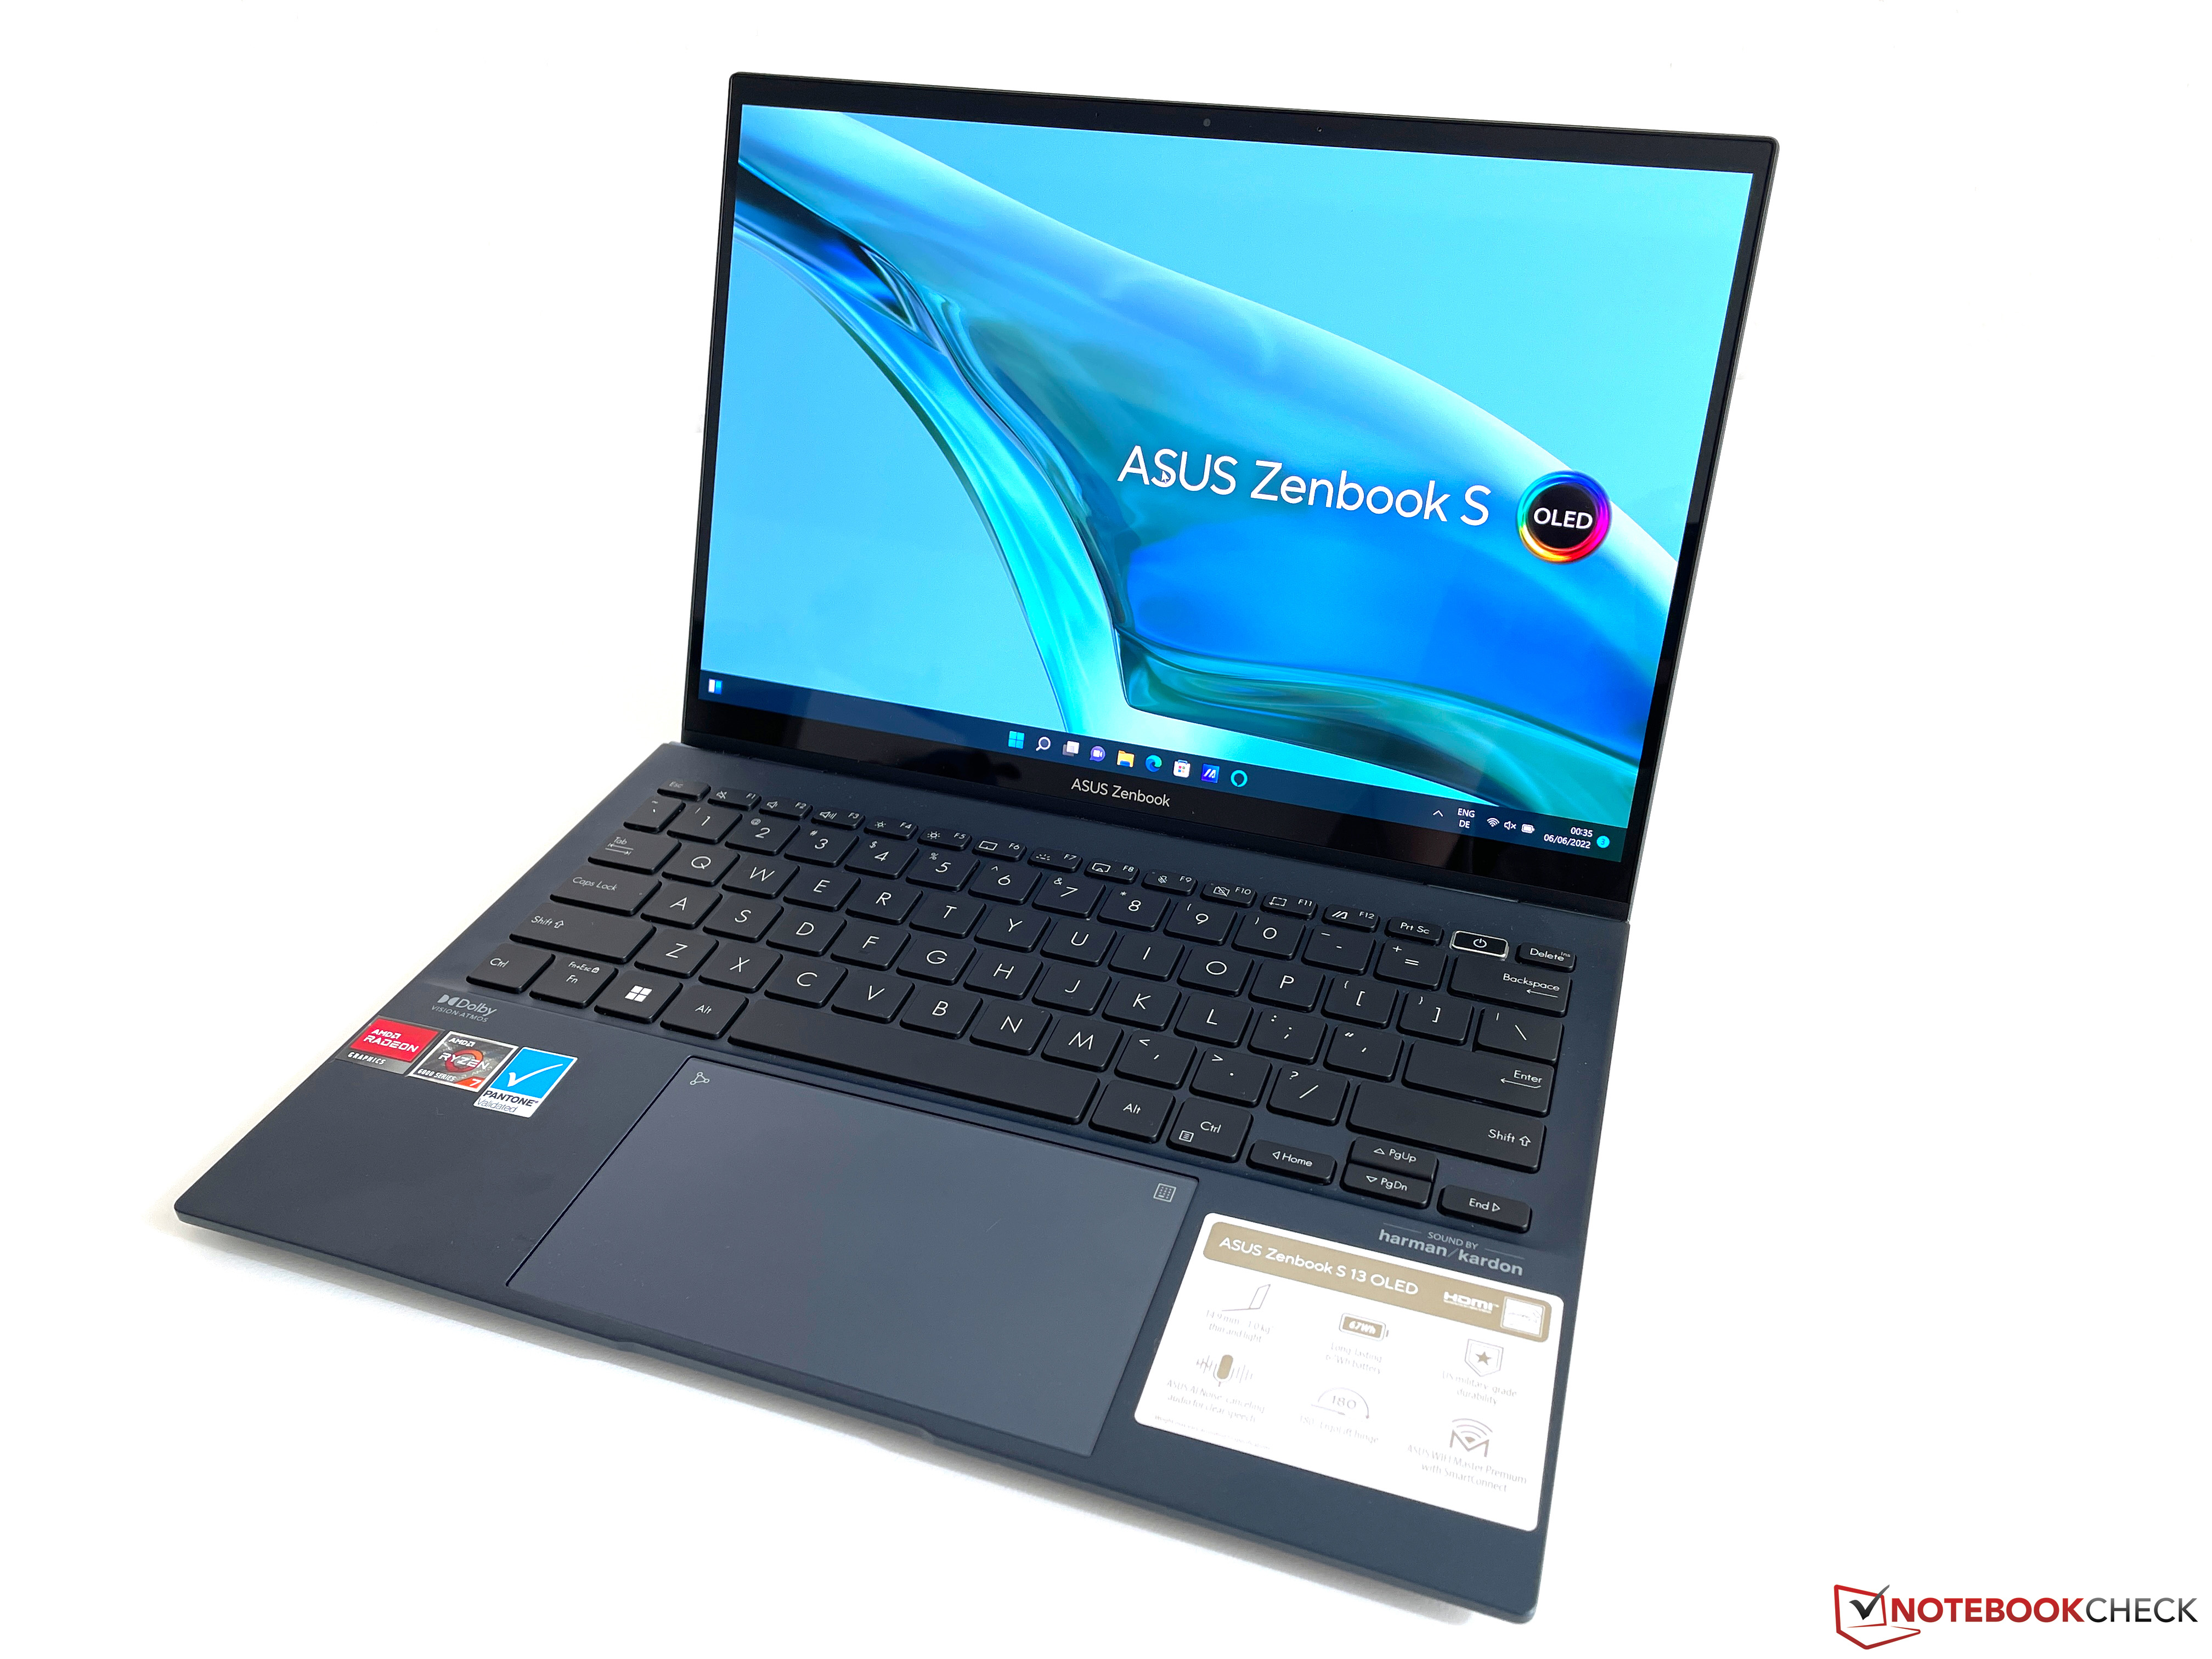 Asus Zenbook S 13 OLED laptop review: Subnotebook impresses with